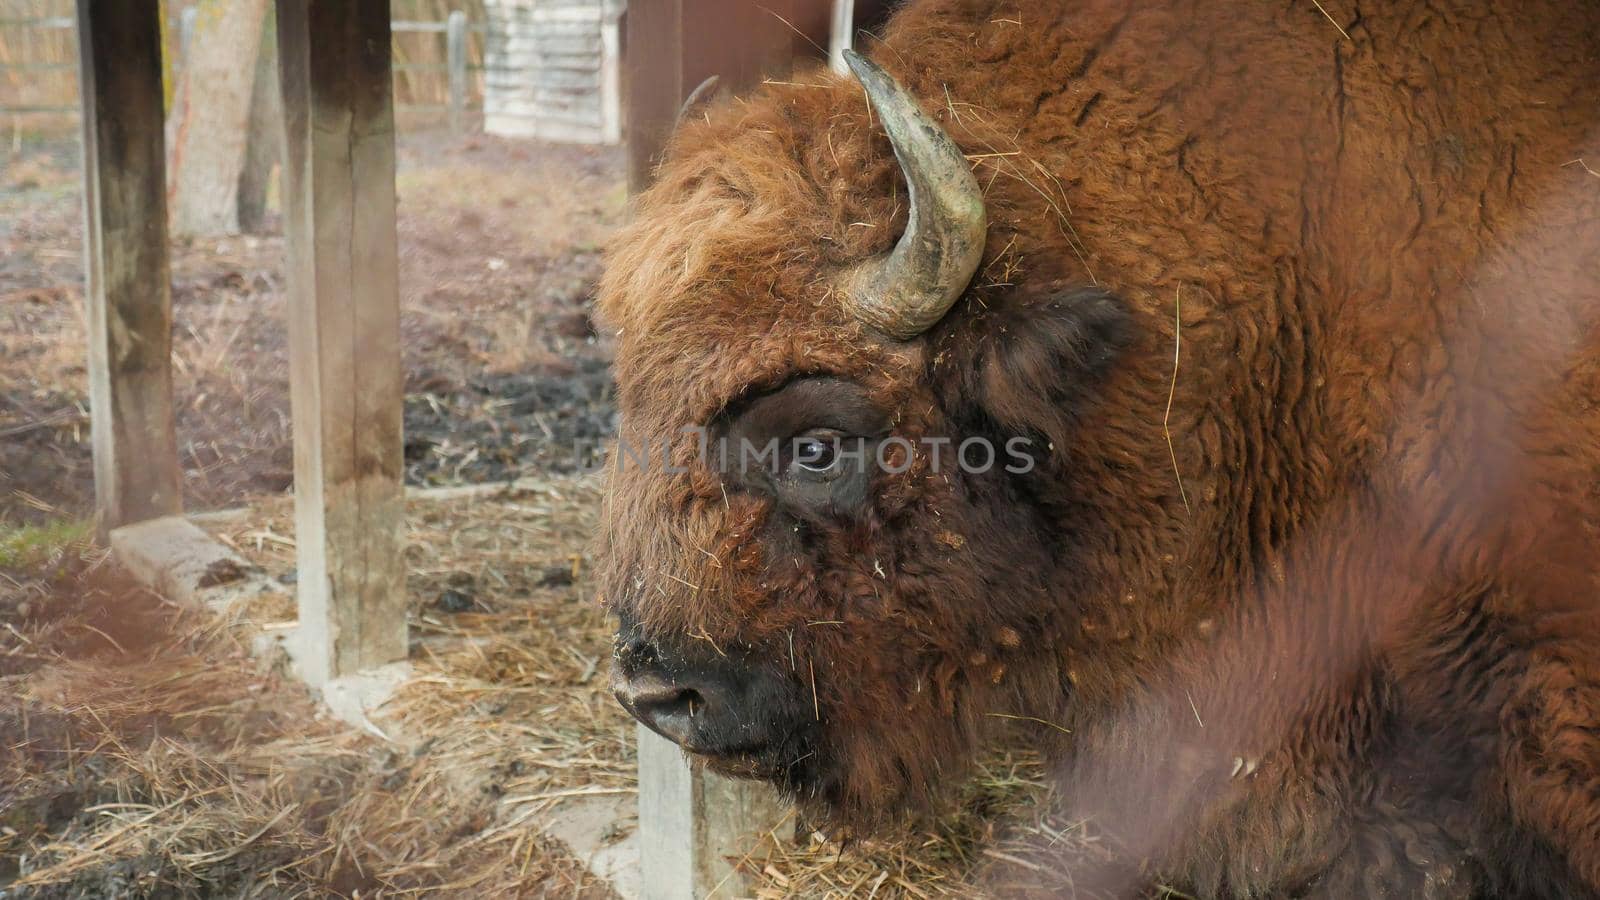 Strong bison after eating by RecCameraStock